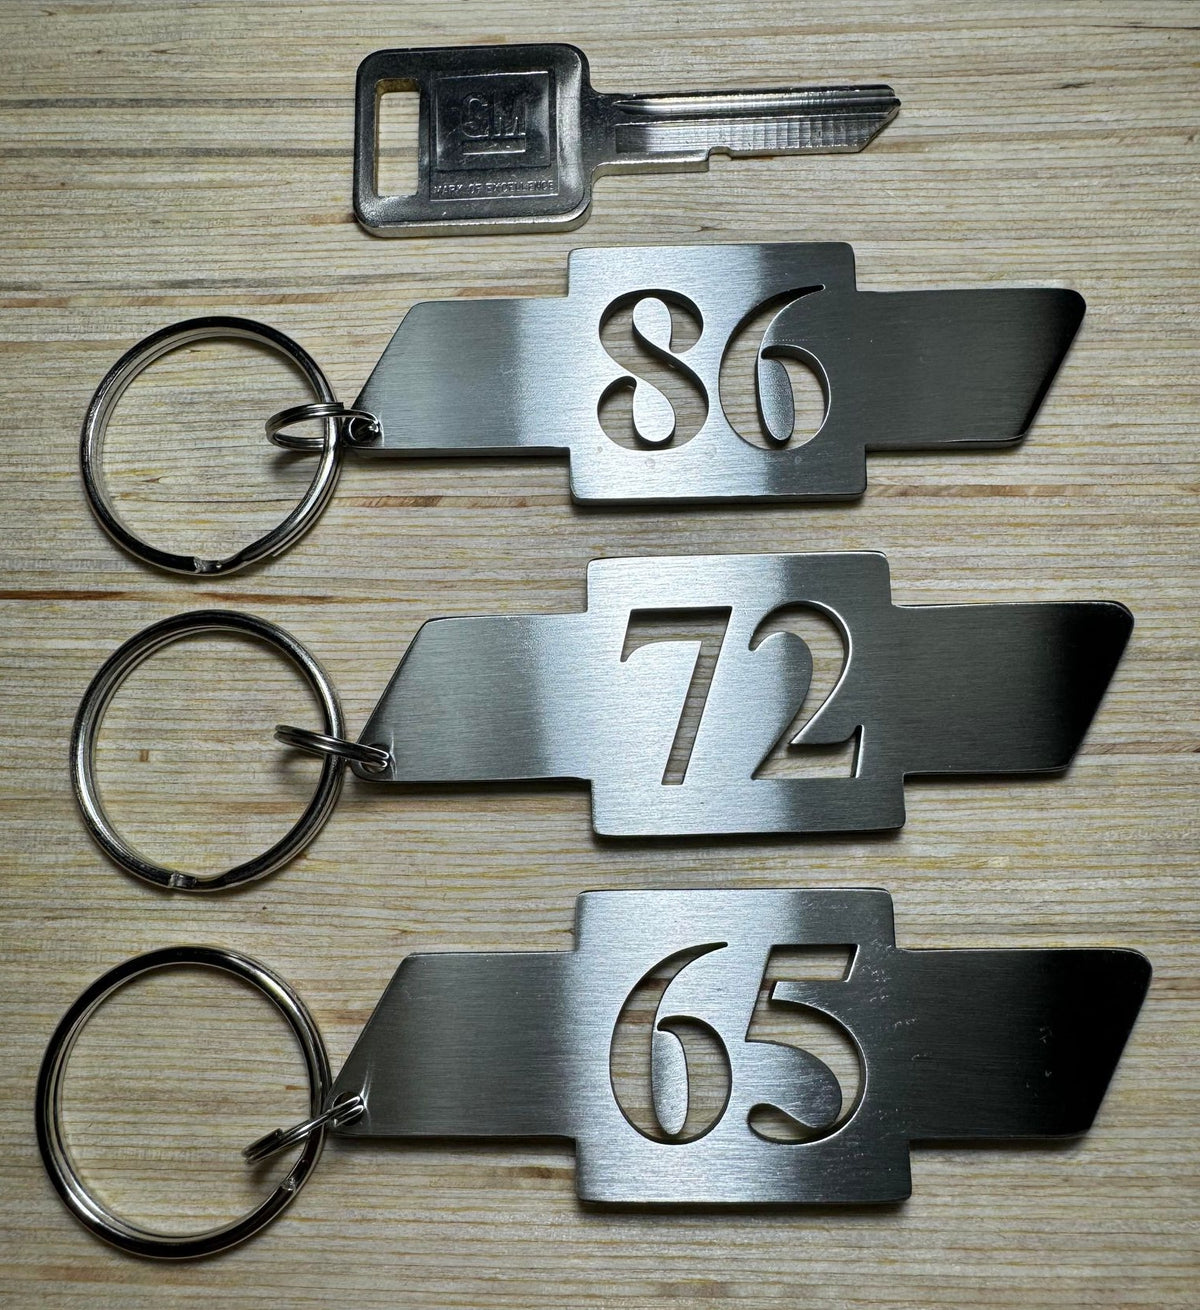 Two Digit Bowtie Stainless Steel Keychains Years from 53/96